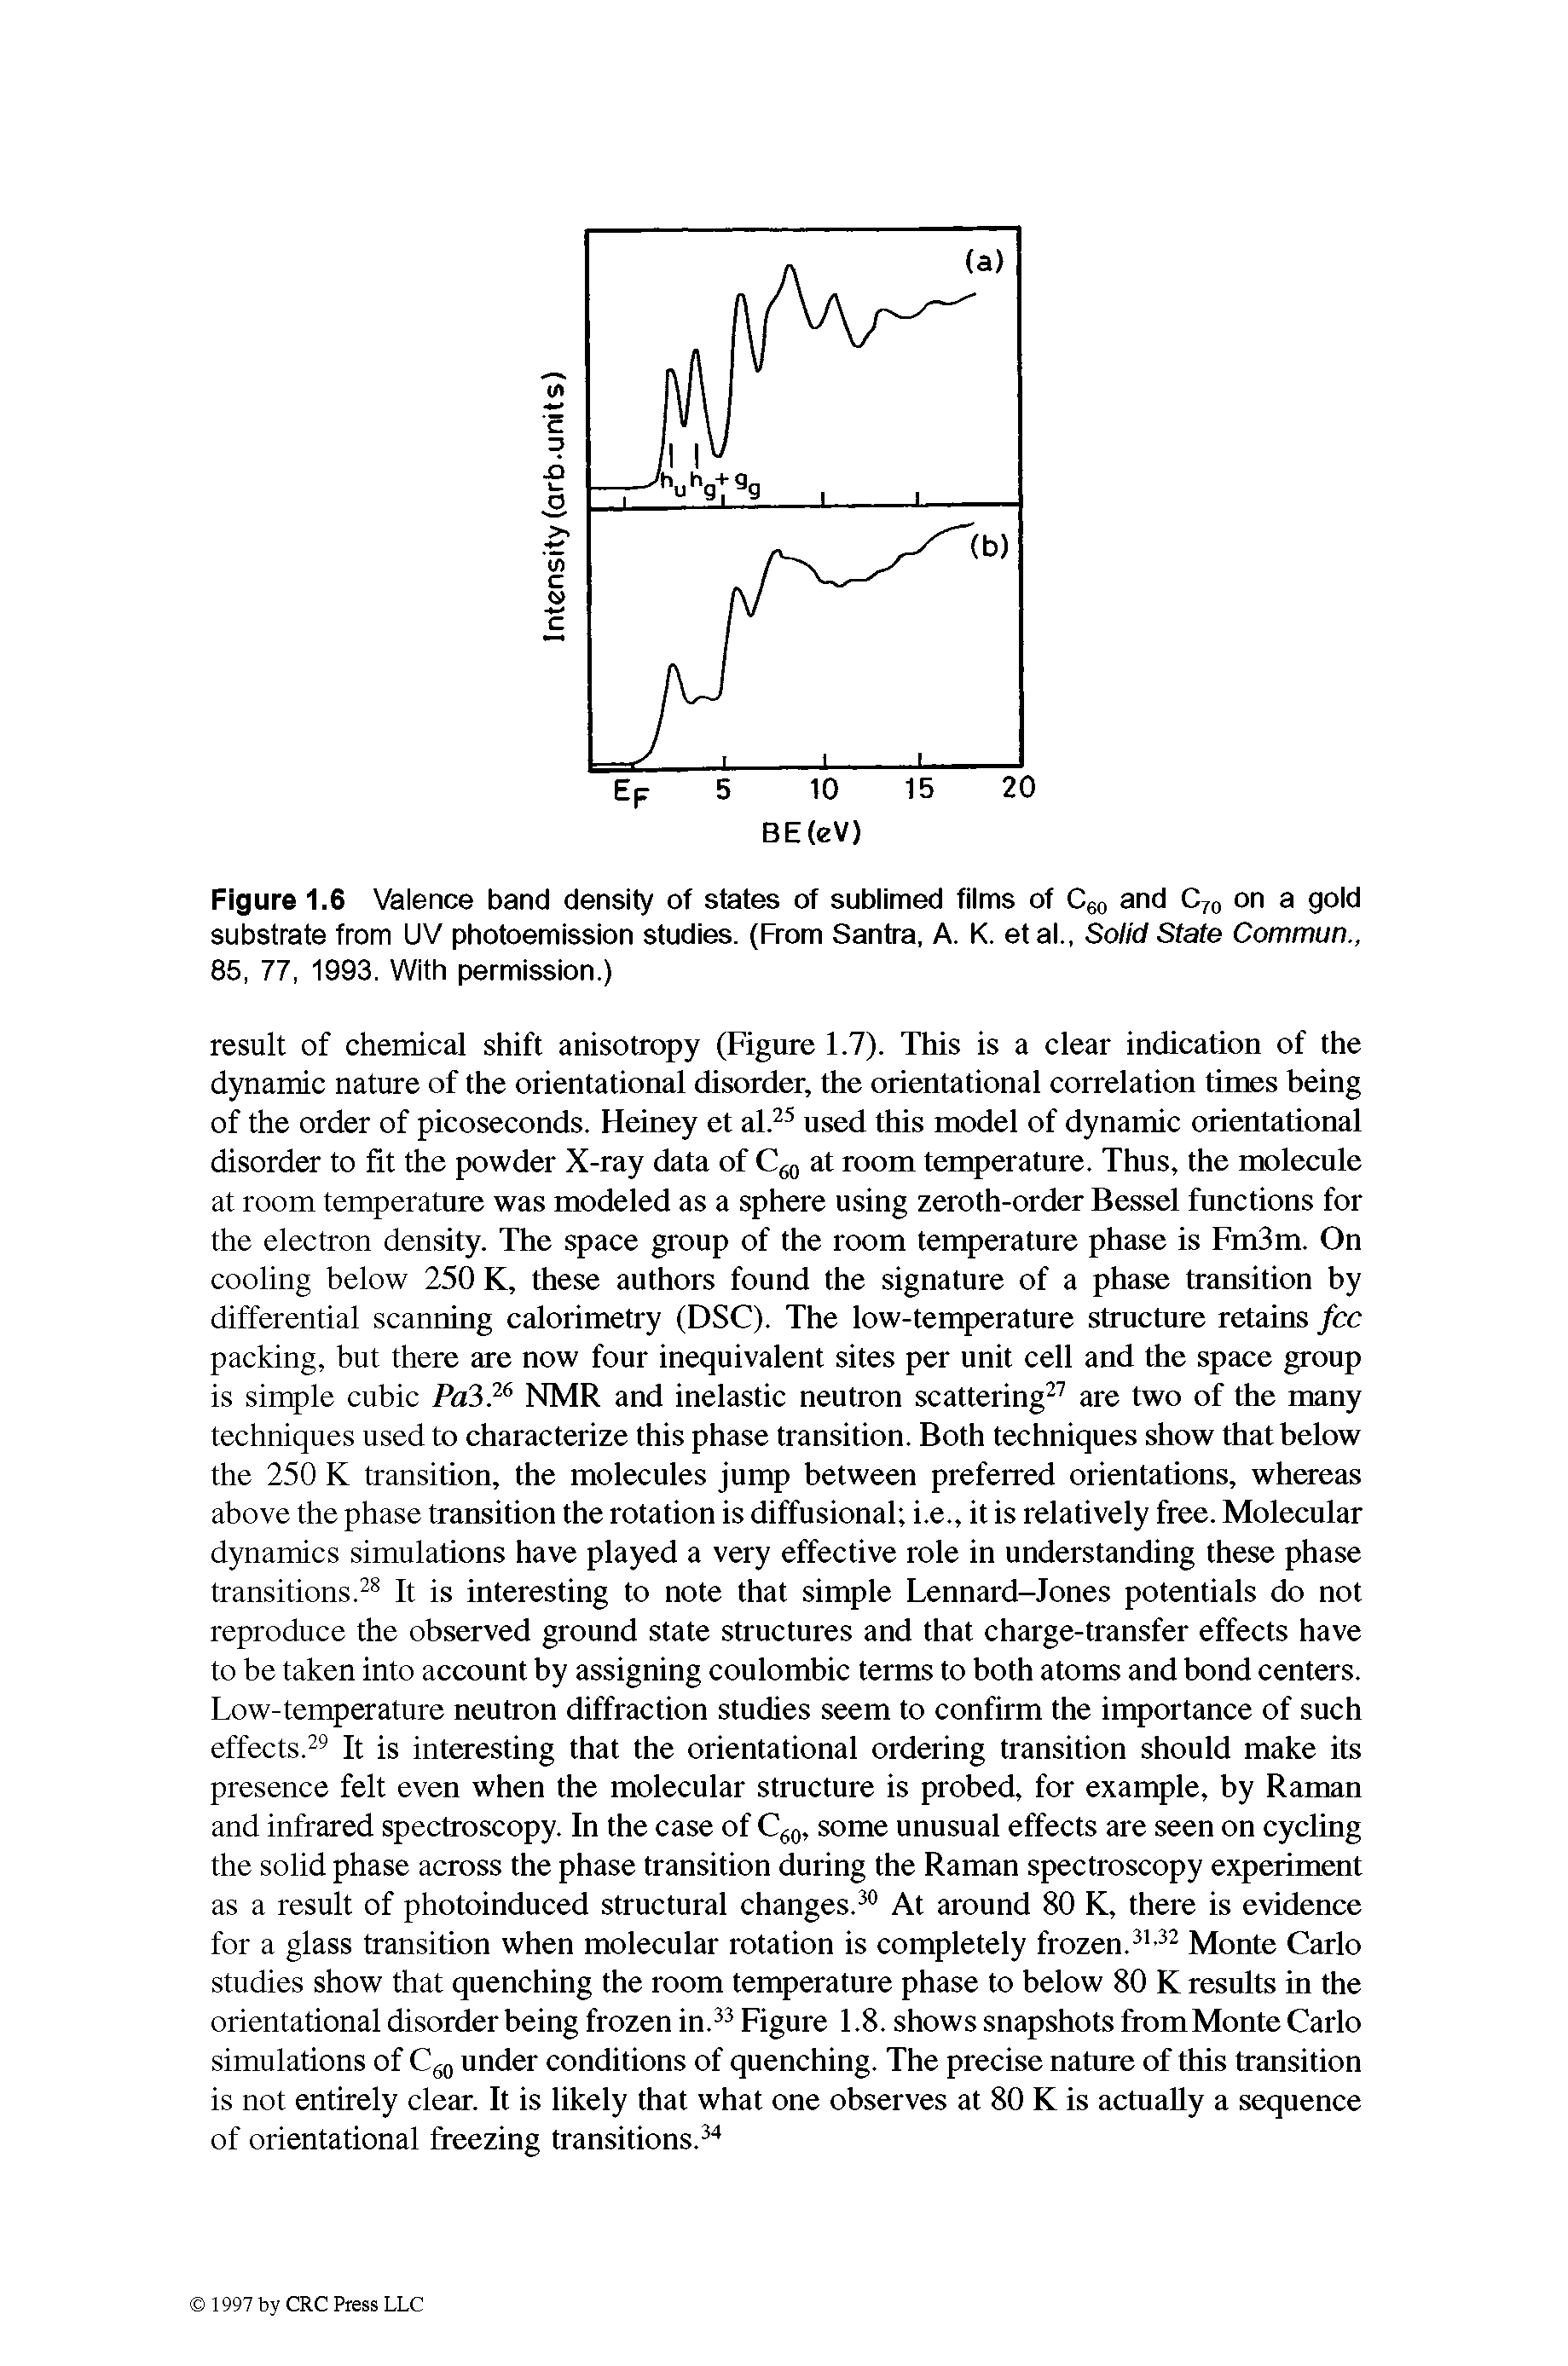 Figure 1.6 Valence band density of states of sublimed films of Cgo and C70 on a gold substrate from UV photoemission studies. (From Santra, A. K. etal., Solid State Commun., 85, 77, 1993. With permission.)...